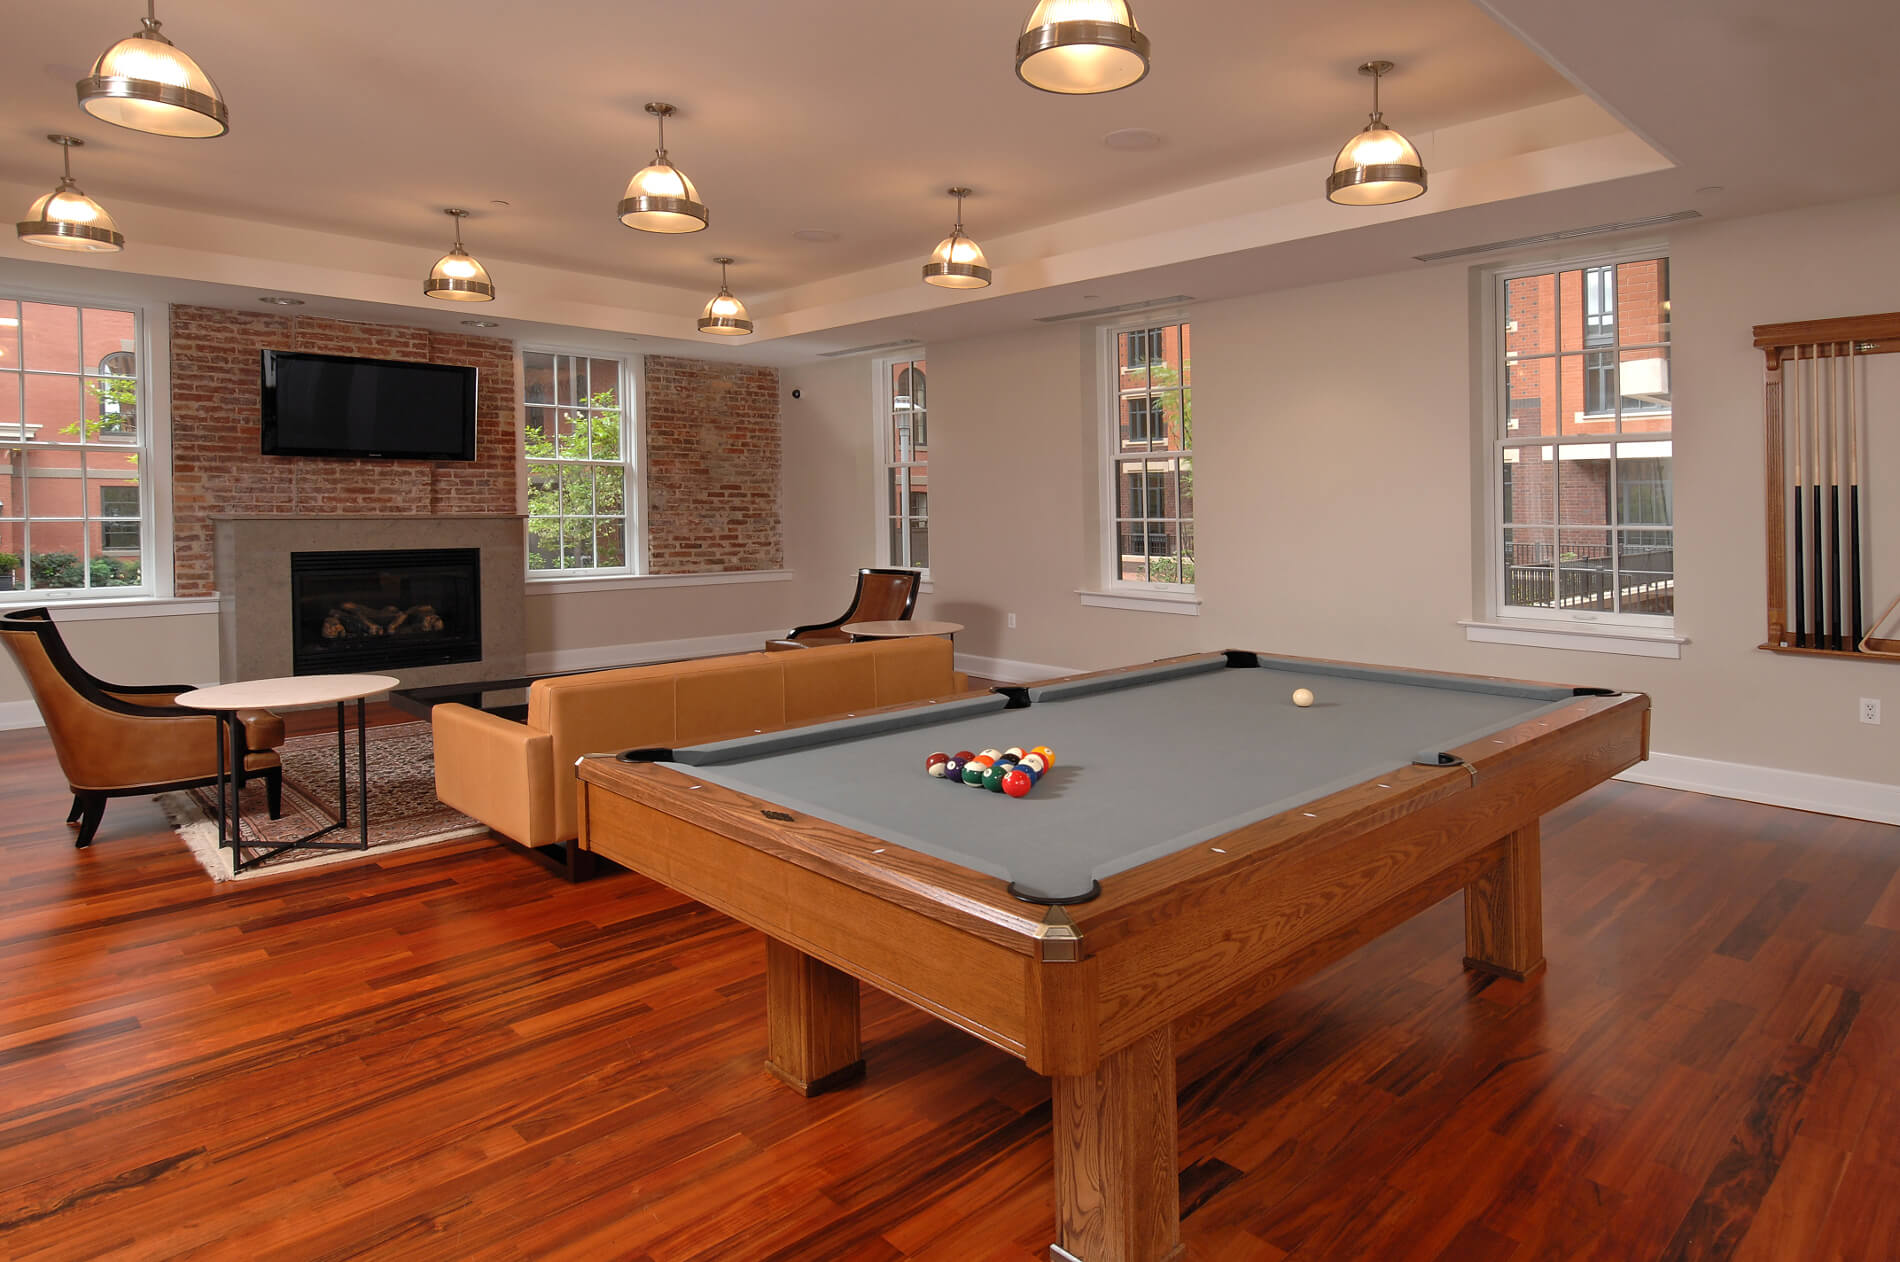 Pool table with seating, pendant lighting, fireplace and views of the outdoors